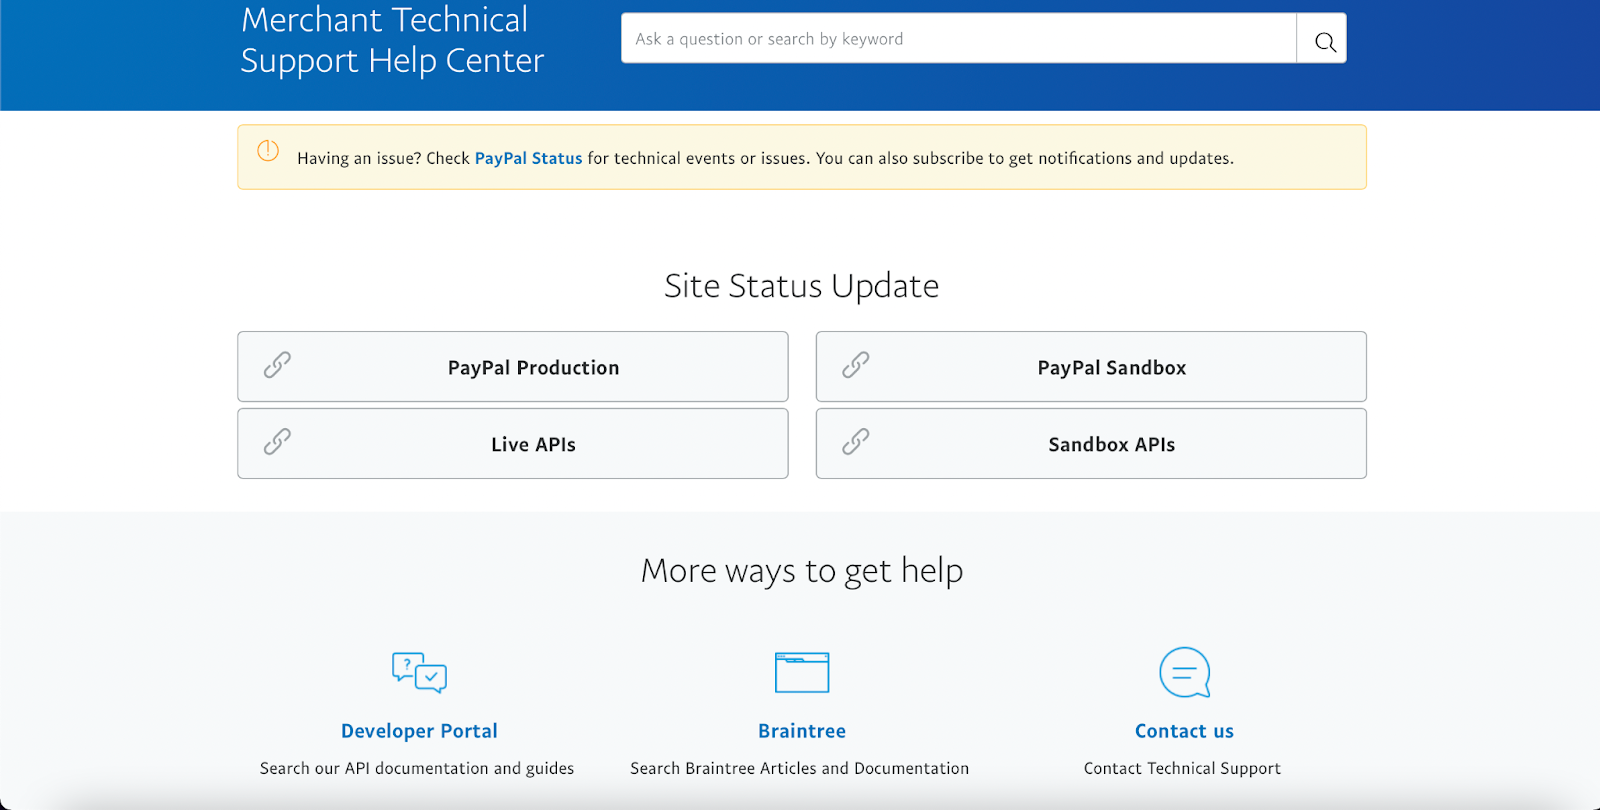 Merchant Technical Support Help Center Page